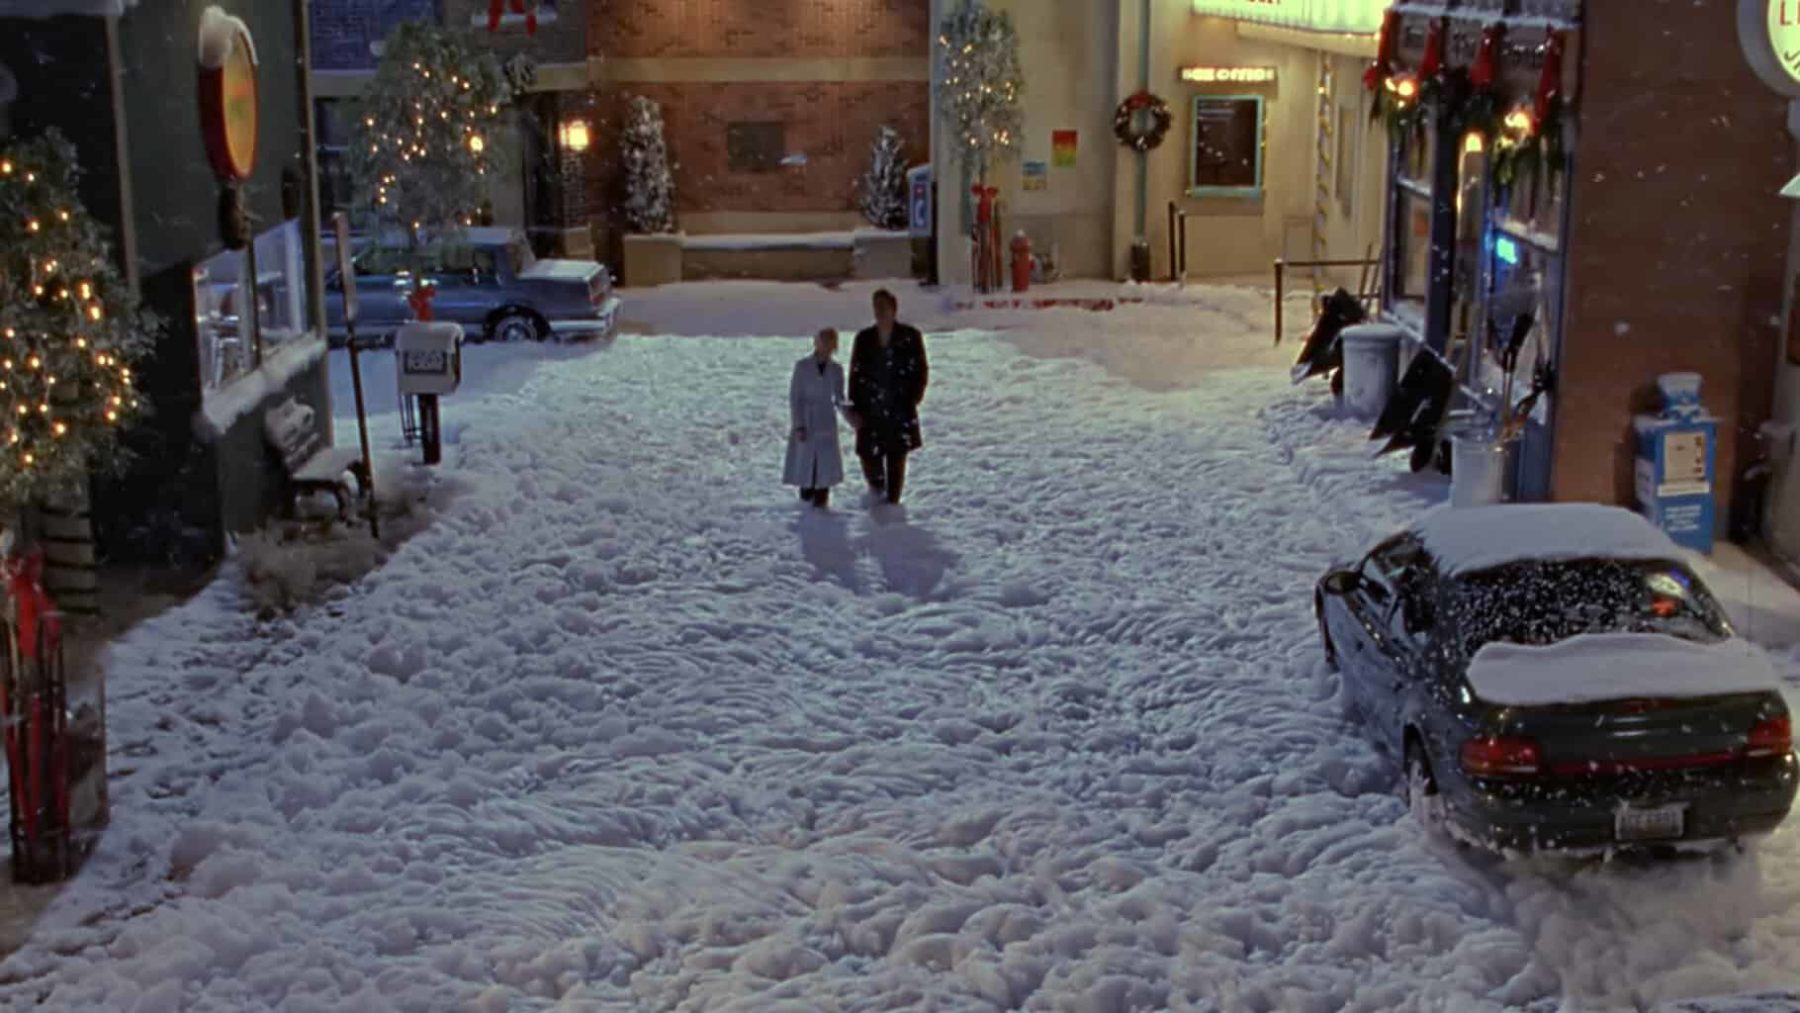 Buffy and Angel walk in the snow in Buffy episode "Amends"